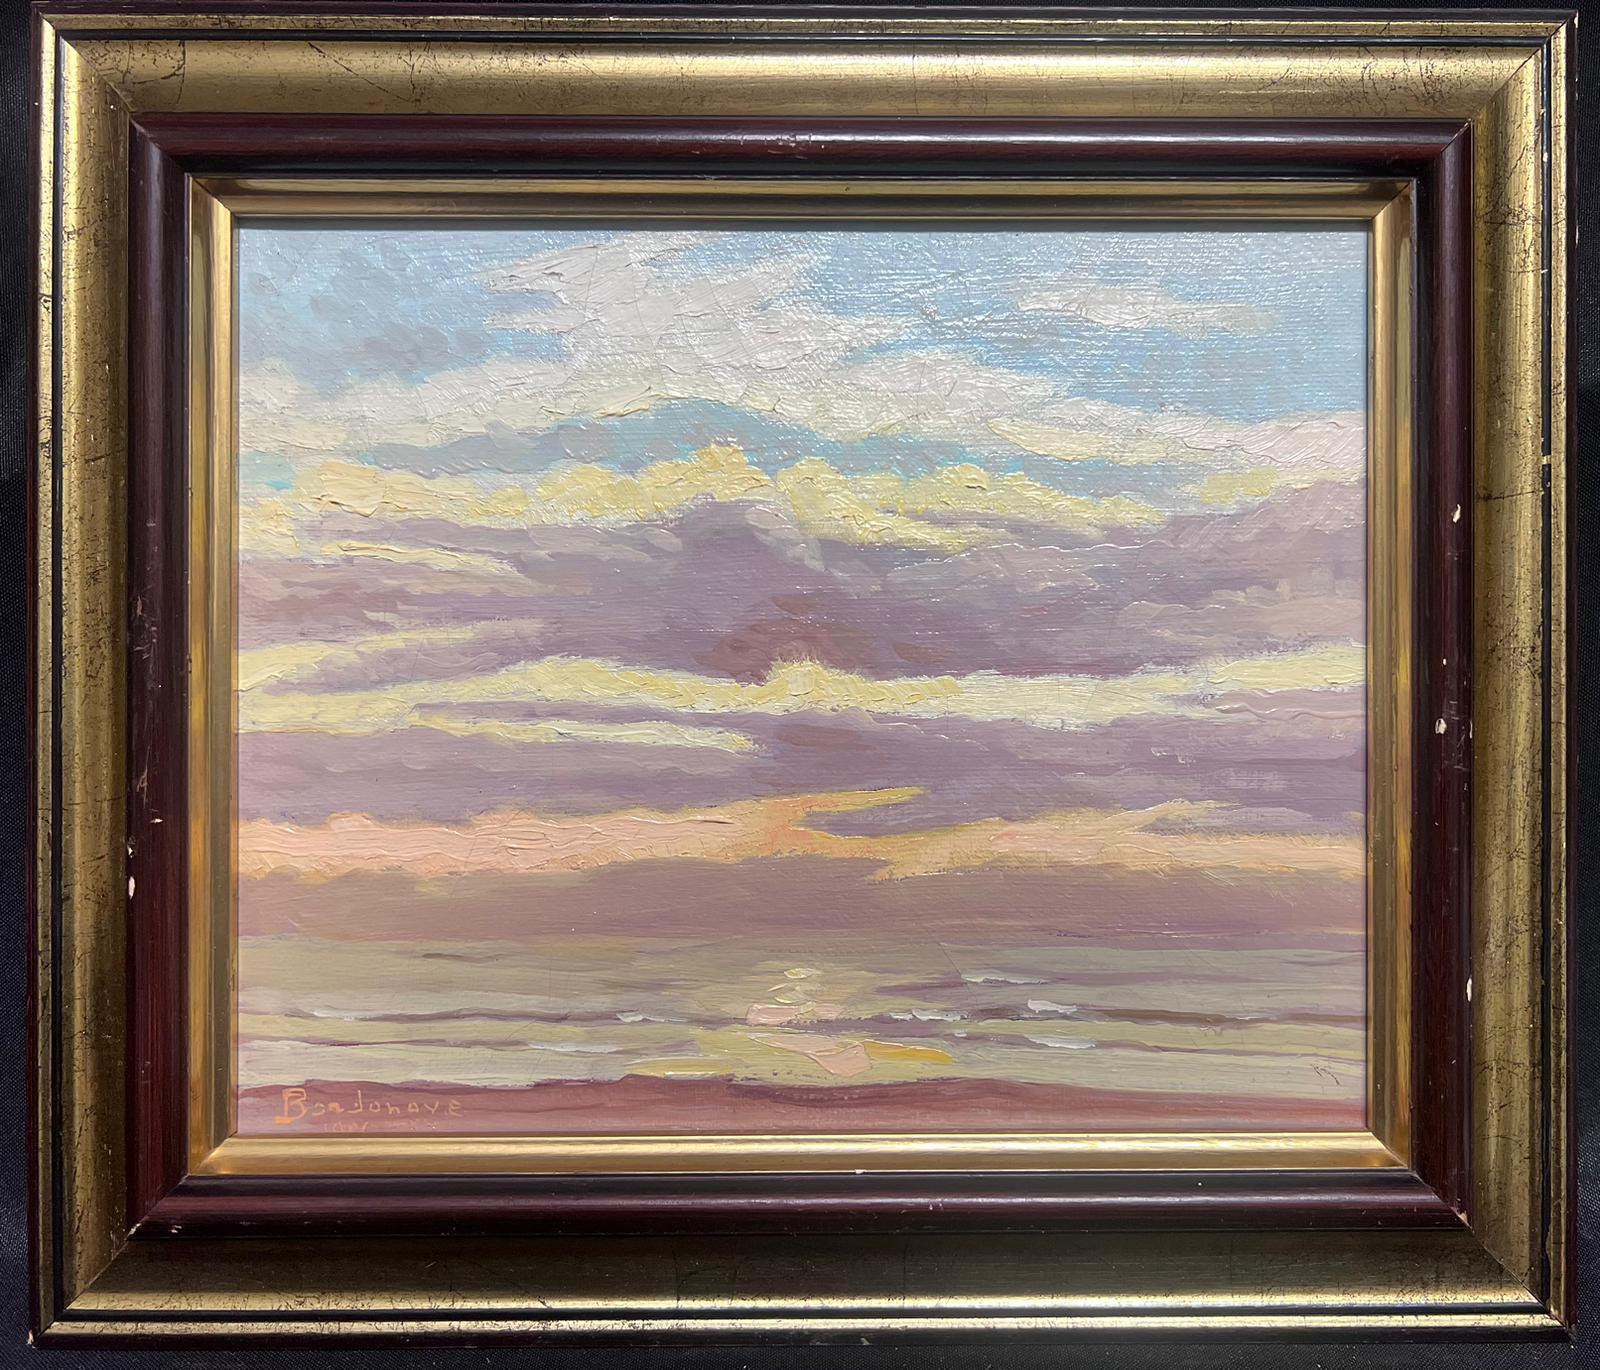 Georges Bordonove Landscape Painting - Contemporary French Impressionist Oil Sunset Clouds over Sea & Beach